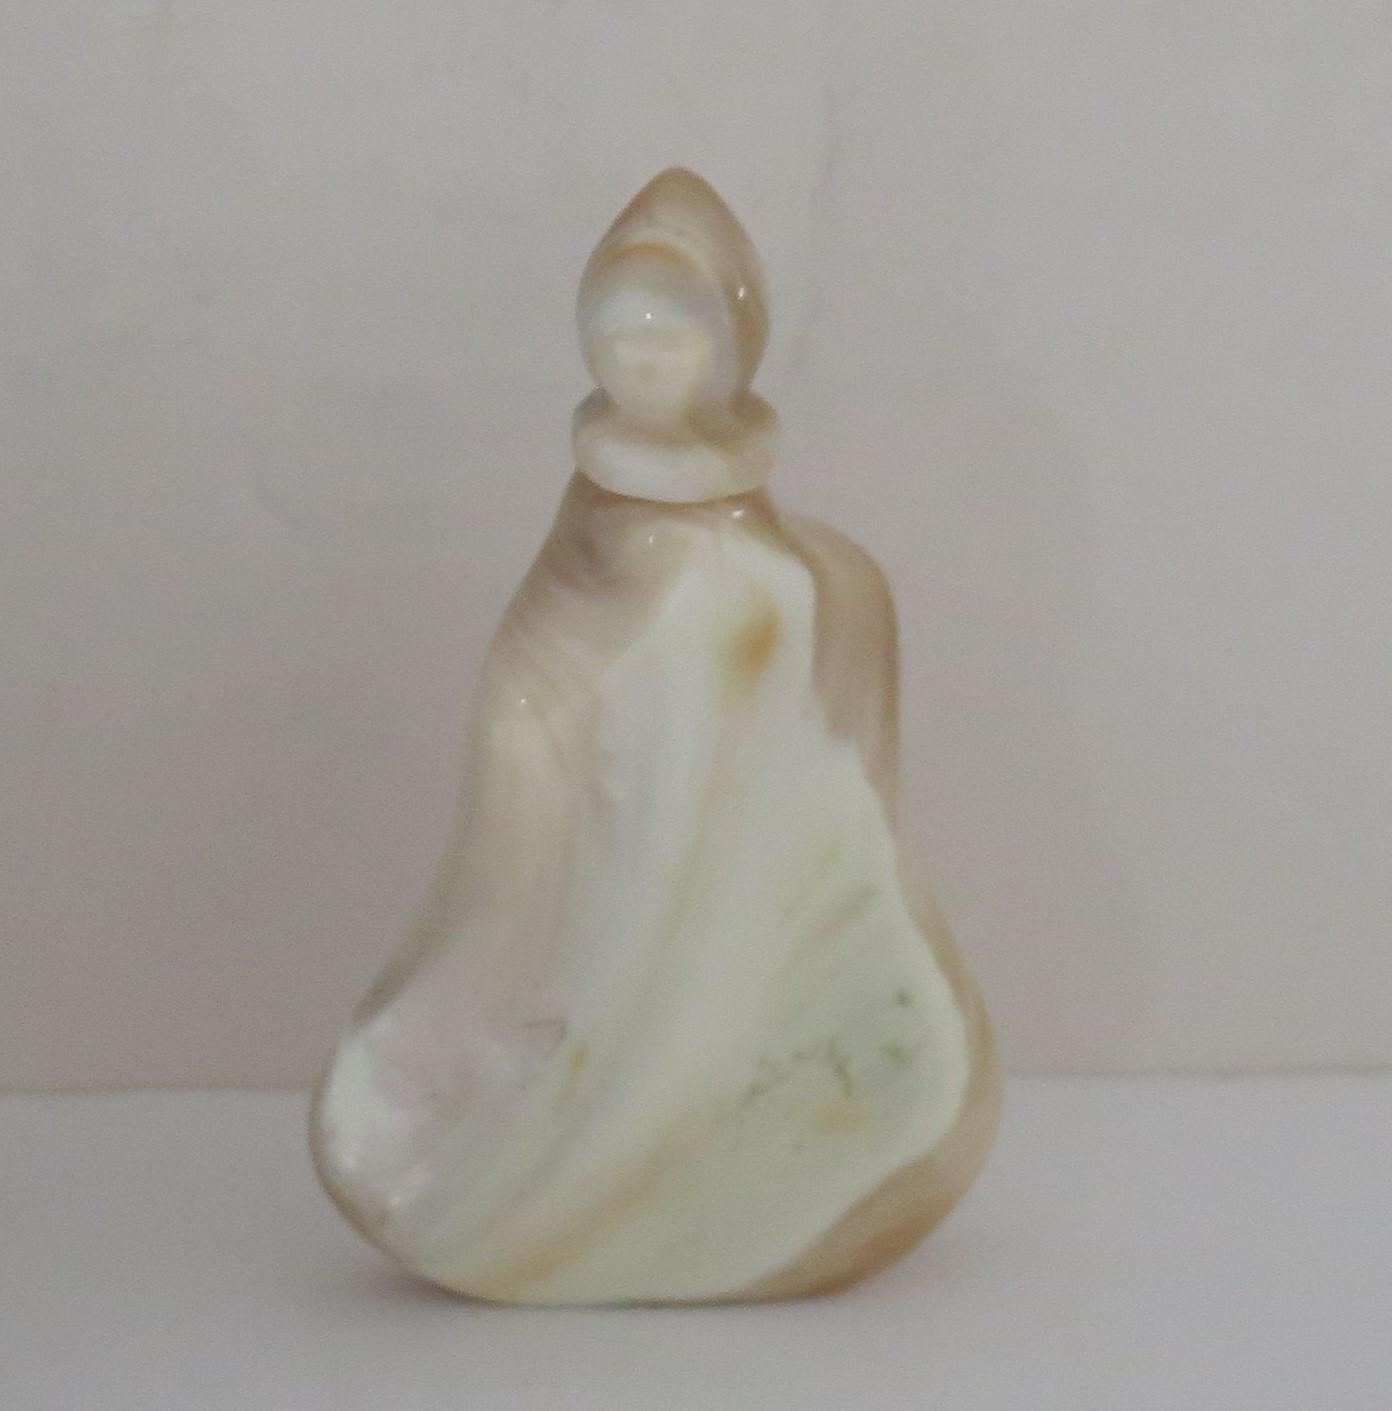 Hand-Carved Chinese Export Snuff Bottle of Natural Agate Stone Spoon Top, circa 1930 For Sale